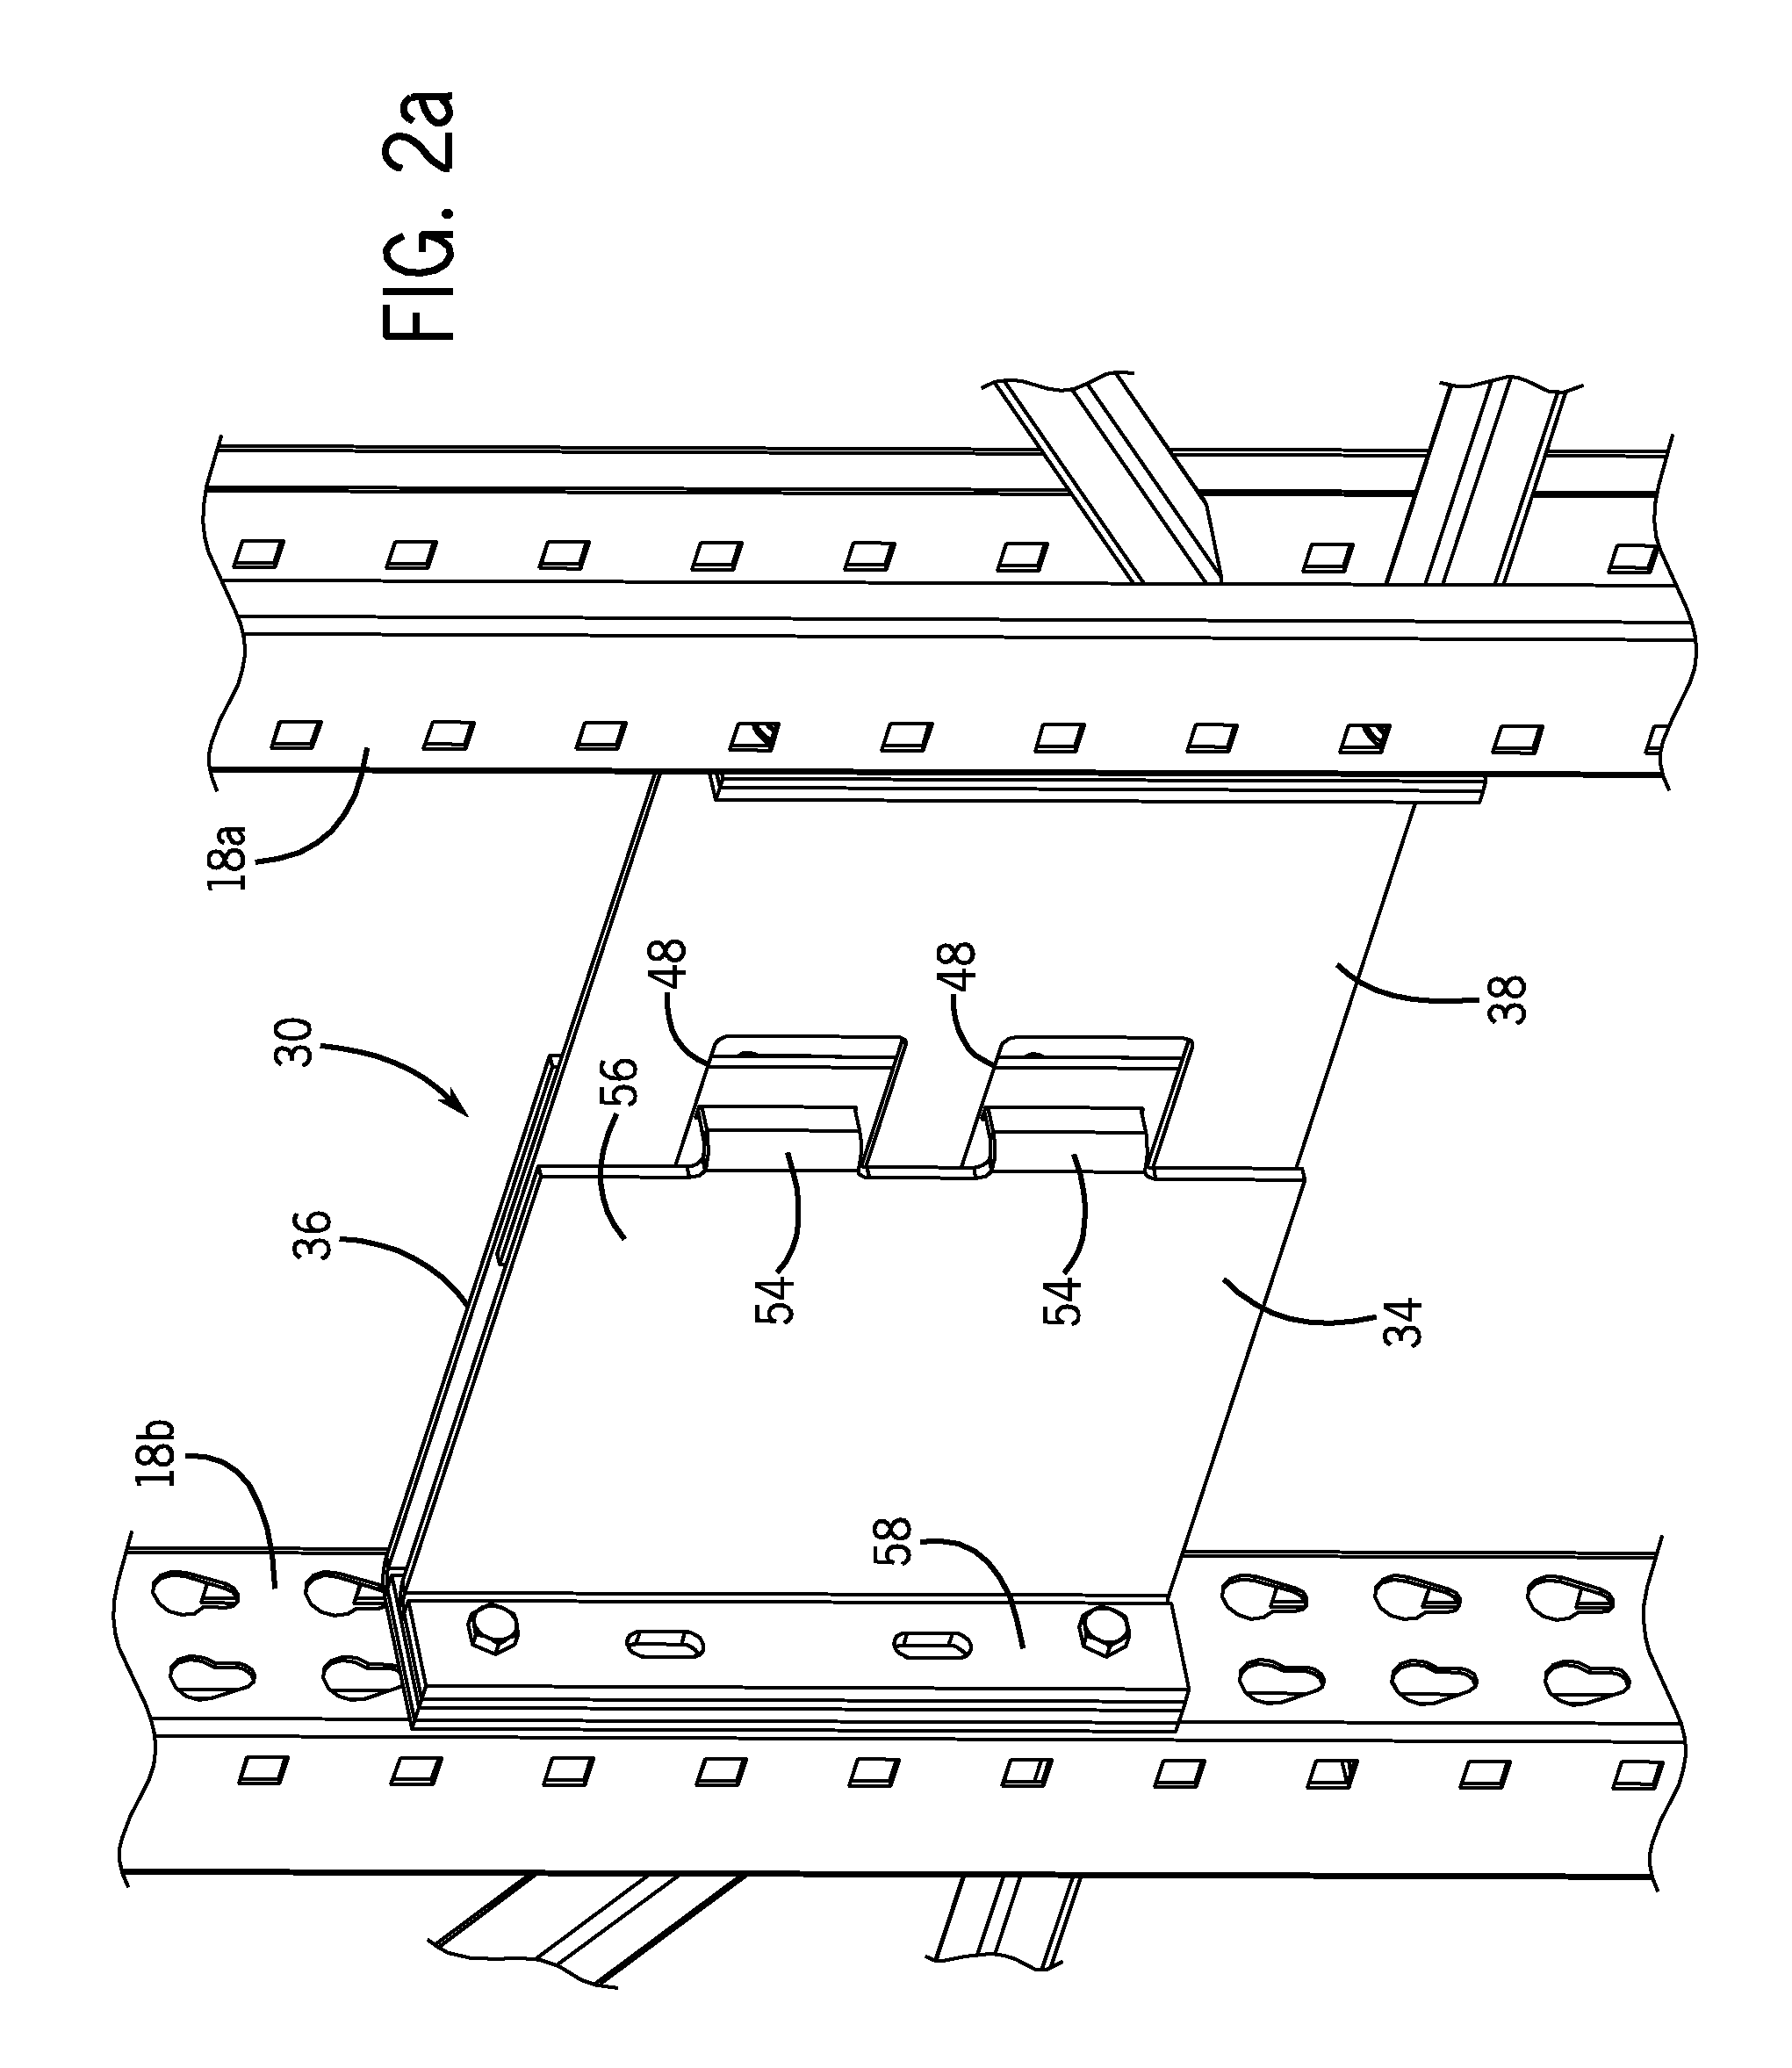 Structural articulation joint for high density mobile carriage